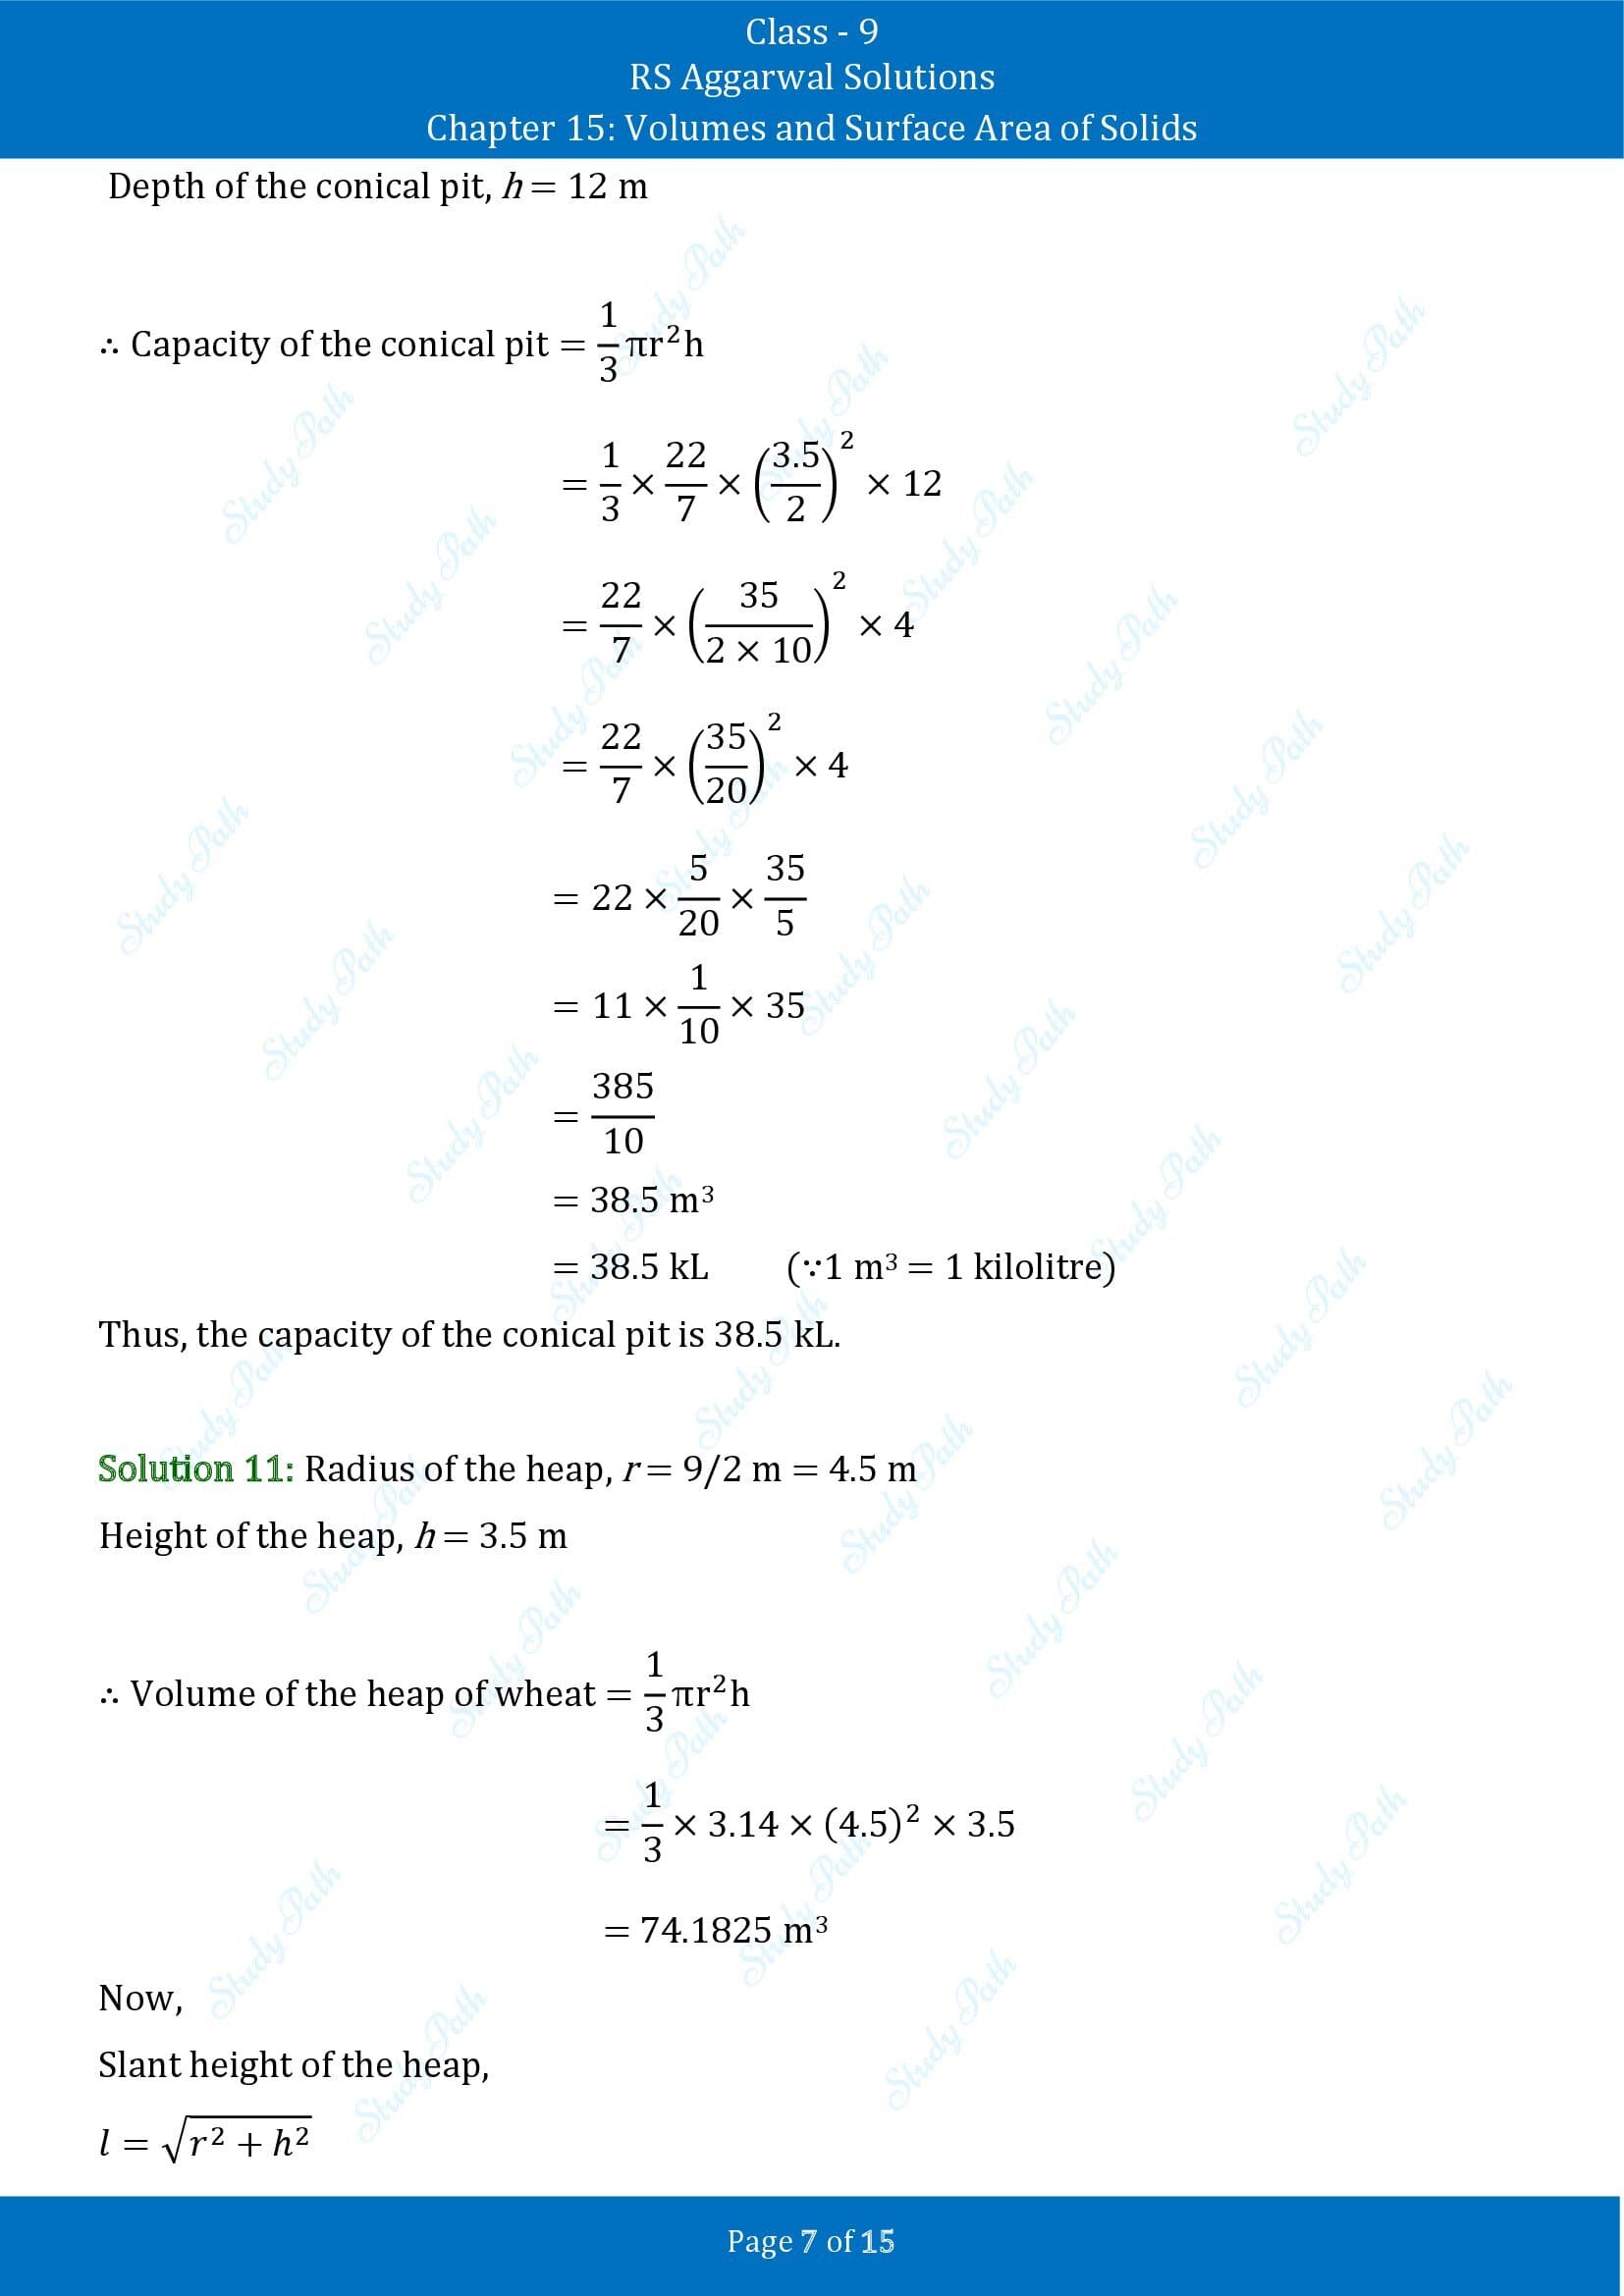 RS Aggarwal Solutions Class 9 Chapter 15 Volumes and Surface Area of Solids Exercise 15C 00007